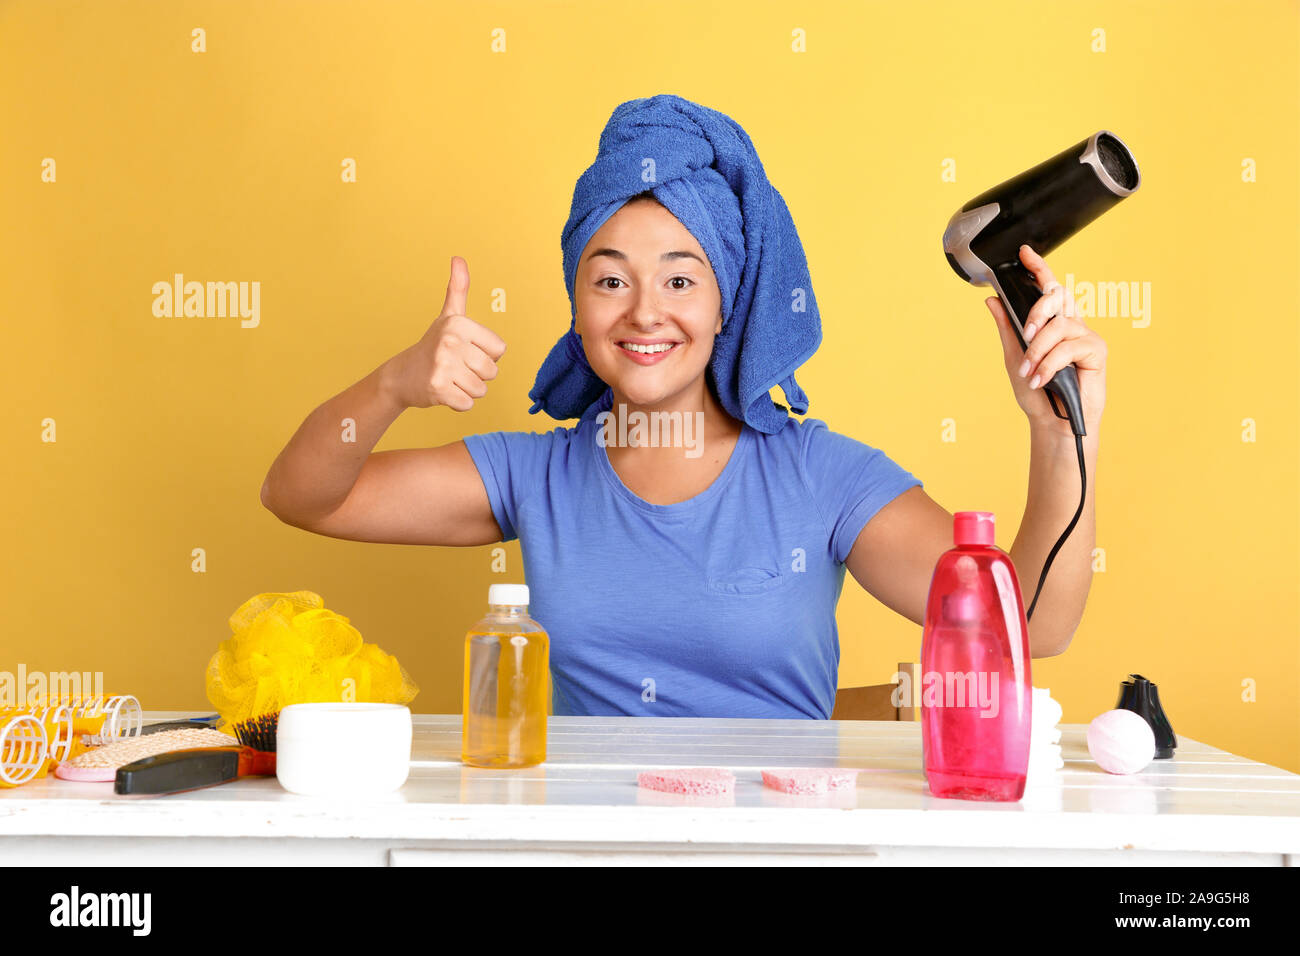 Portrait of young caucasian woman in her beauty day, skin and hair care routine. Female model with natural cosmetics applying cream and oils for make up. Body and face care, natural beauty concept. Stock Photo